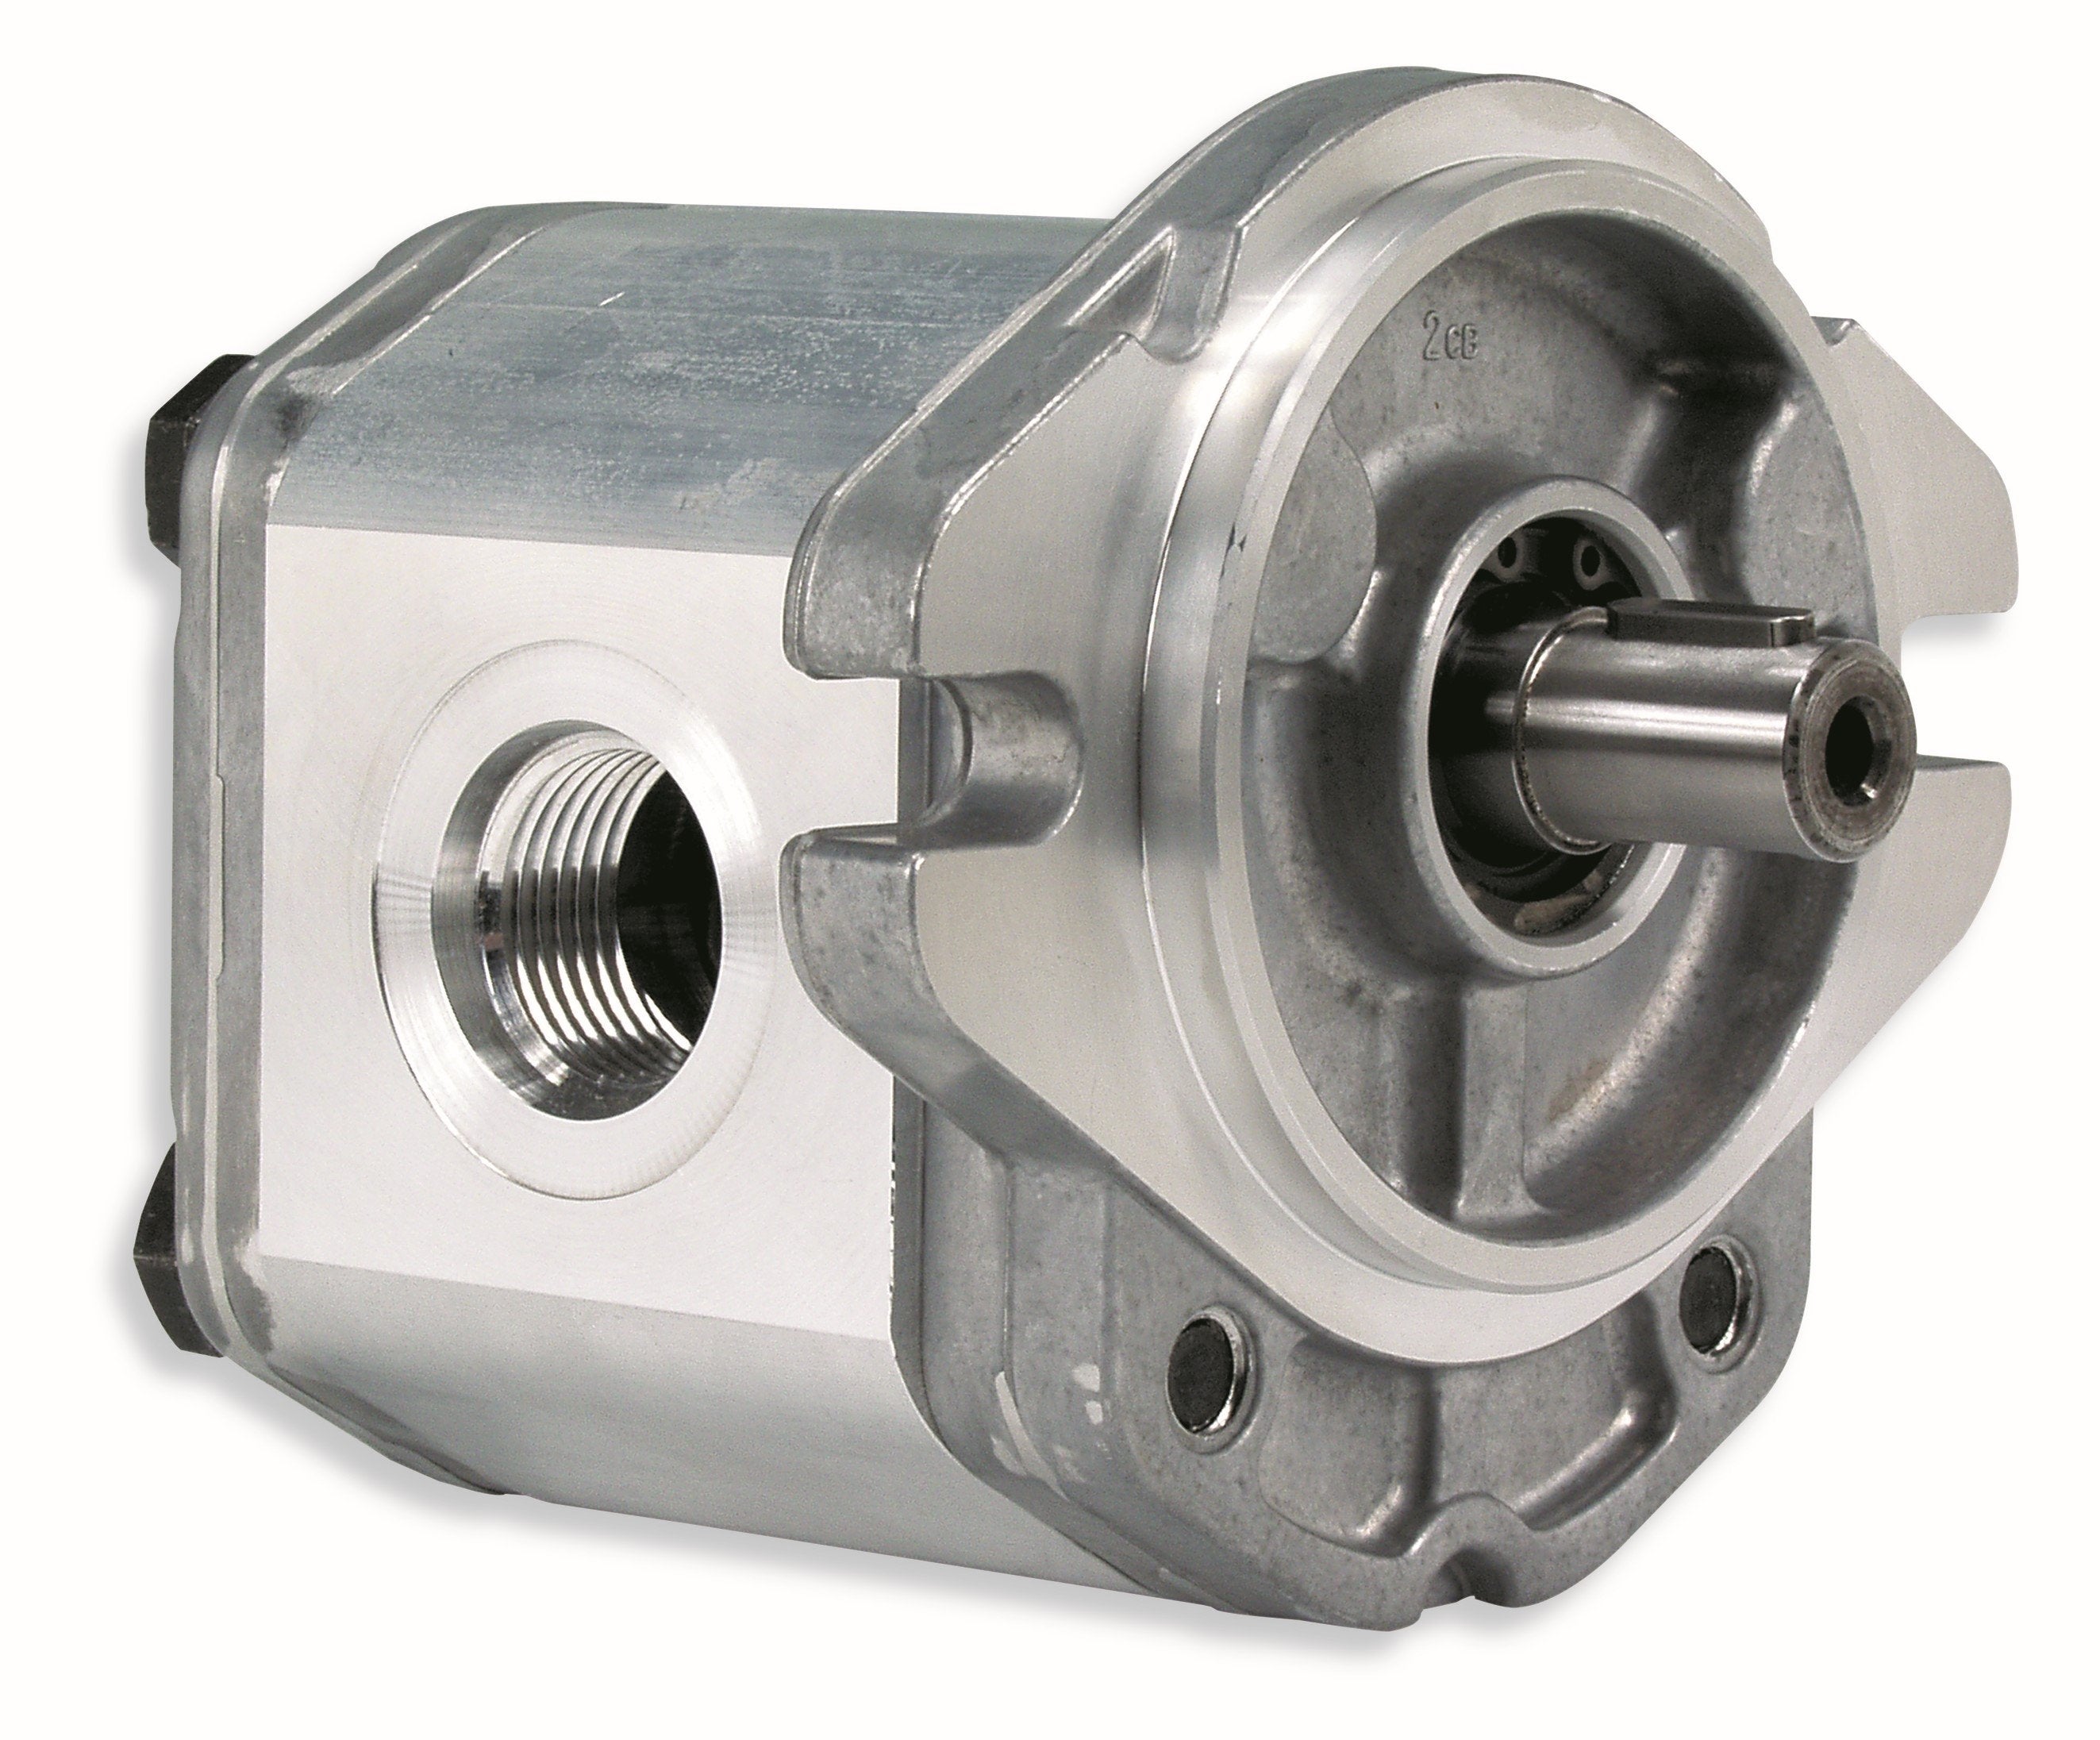 GHM1A-R-9-S1-E2 : Marzocchi Gear Motor, Bidirectional, 6.2cc, 3770psi rated, 3000RPM, 0.5 (1/2") #8 SAE ports, 9T 20/40DP Splined Shaft